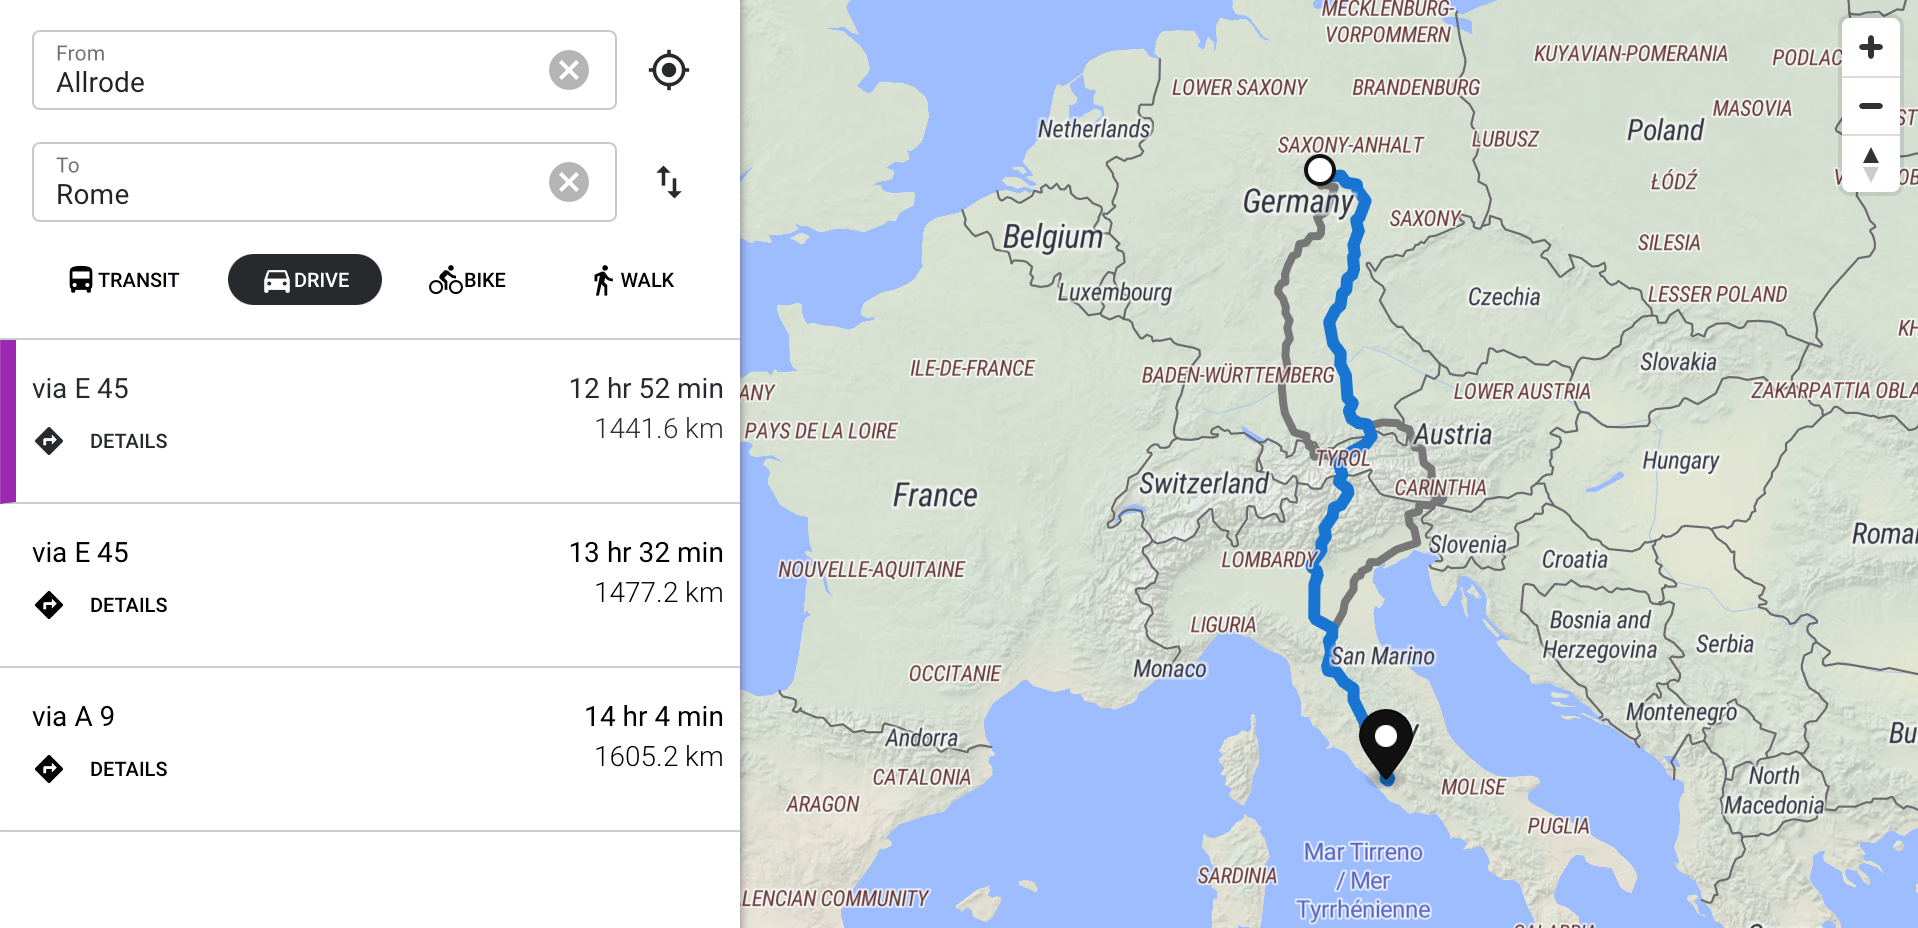 screenshot of a Headway map framing most of central Europe that shows several alternatives for driving directions from Allrode, Germany to Rome, Italy